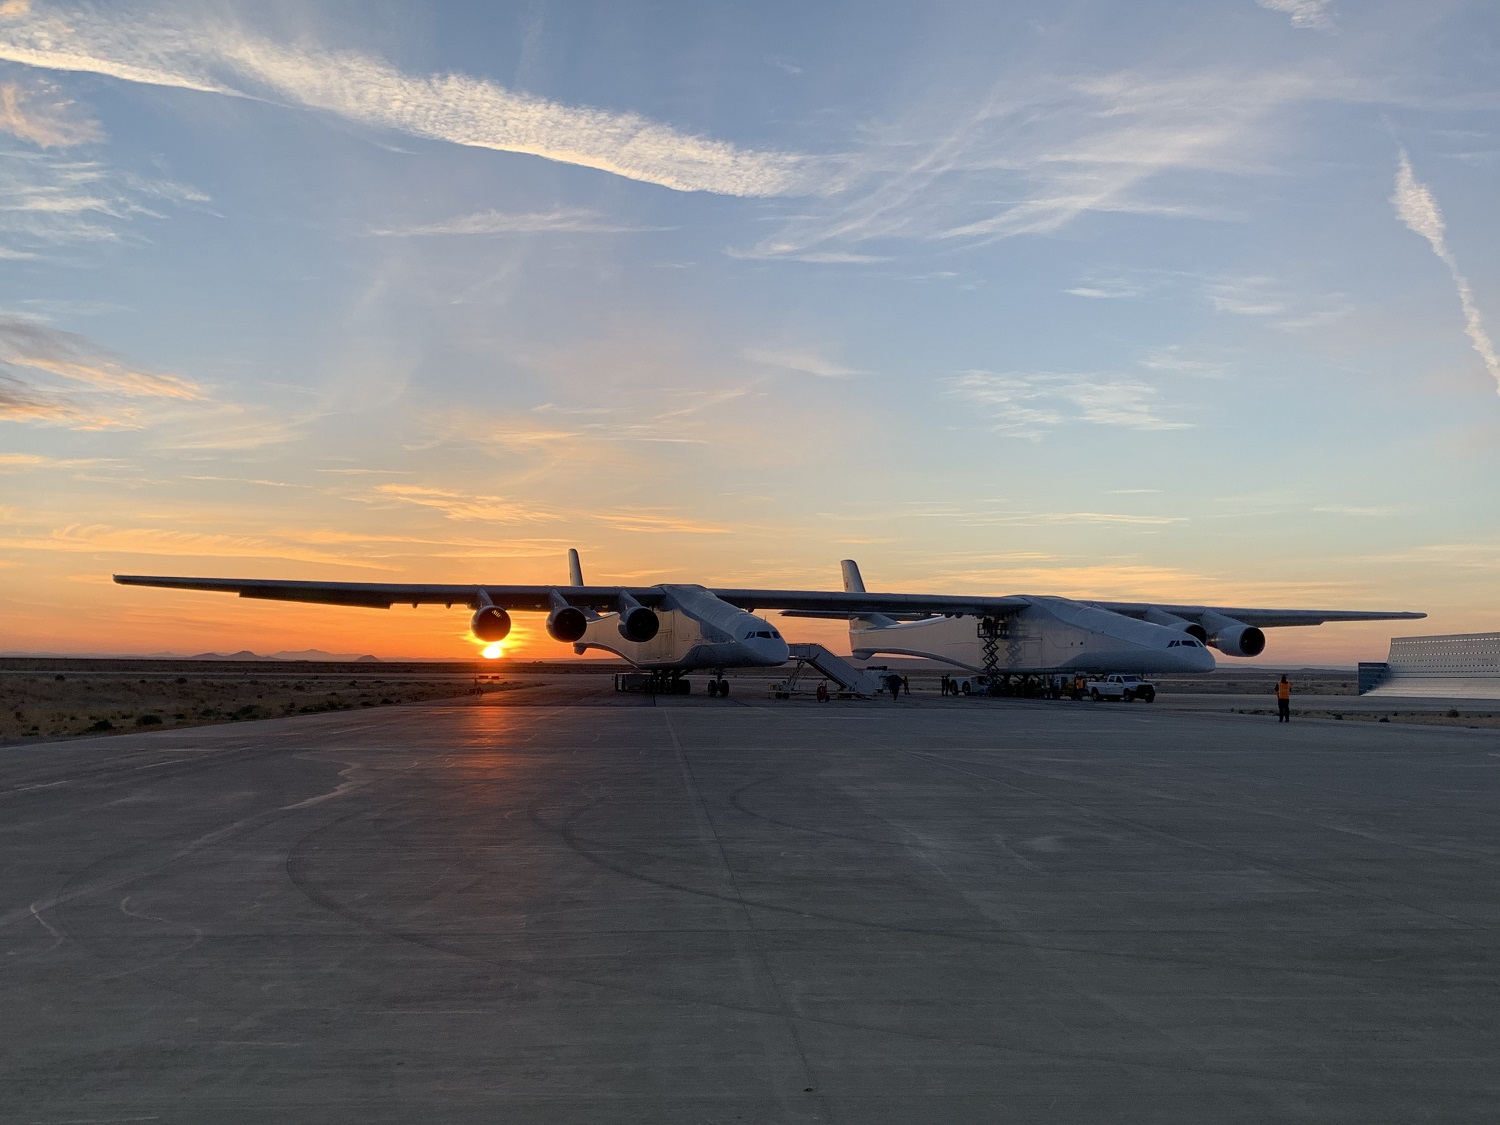 Stratolaunch  Carrier Programme  Re-activation  - Today, the twin  Fuselage  aircraft  did  taxi  tests  upto  speeds  of  110 Knots !